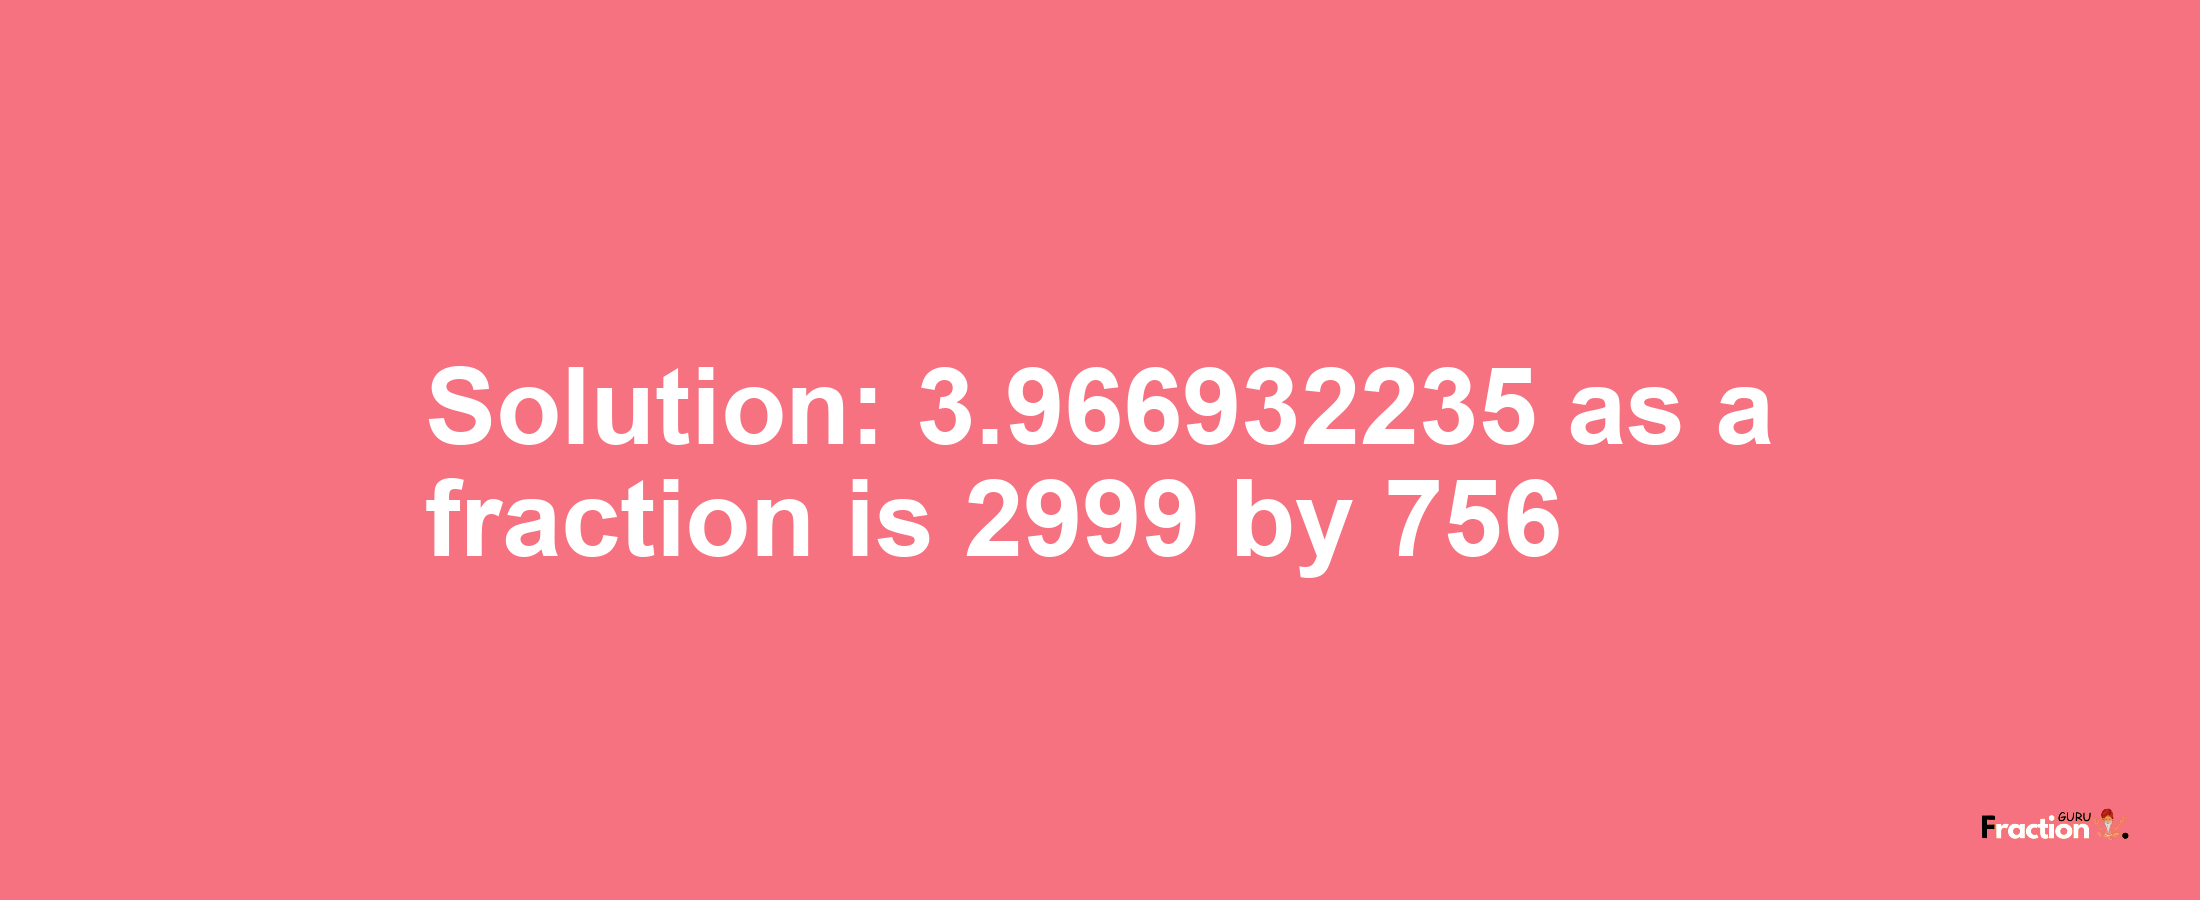 Solution:3.966932235 as a fraction is 2999/756